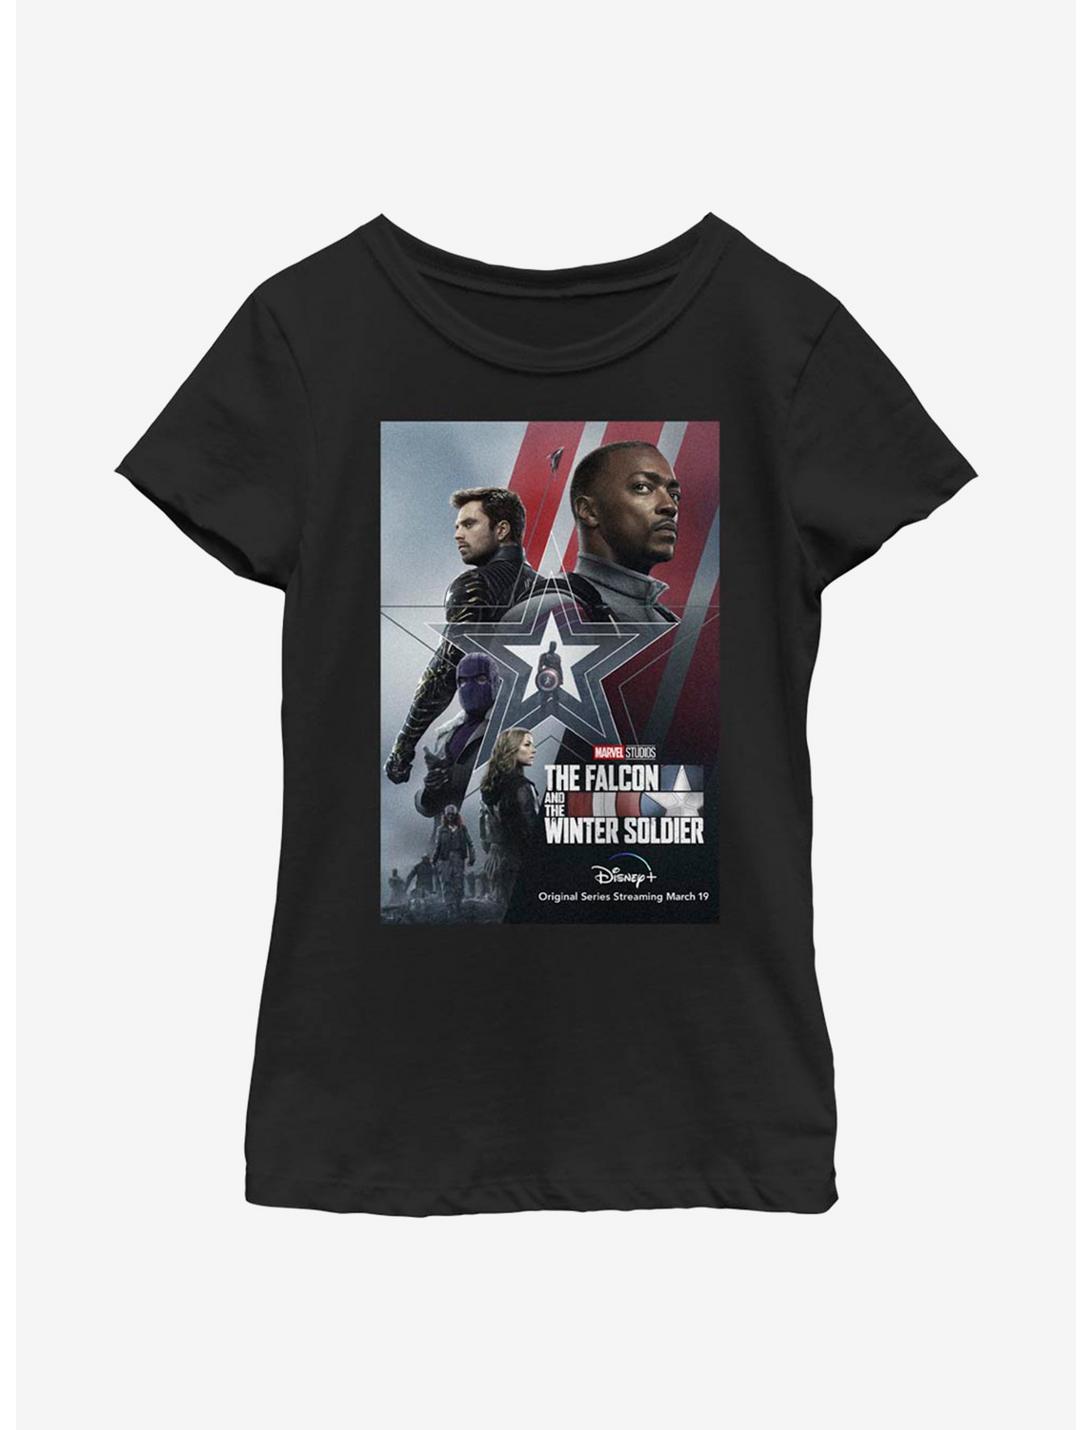 Marvel The Falcon And The Winter Soldier Poster Art Youth Girls T-Shirt, BLACK, hi-res